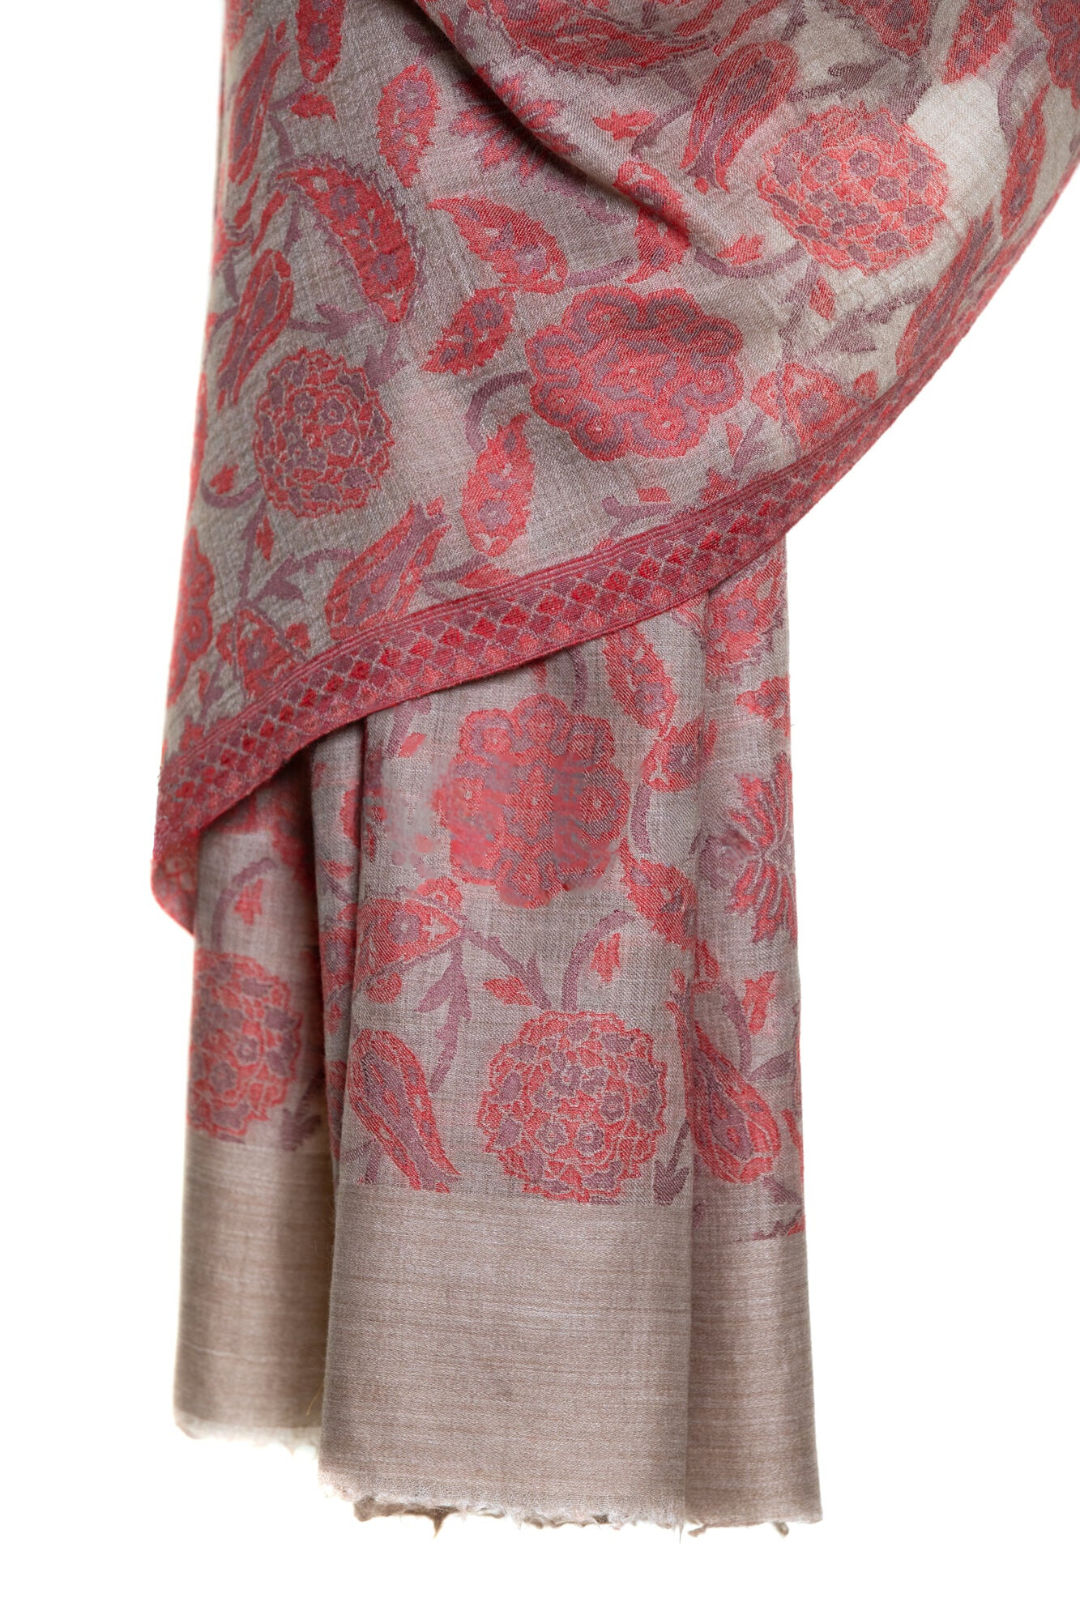 Abstract Floral Paisley Cashmere Pashmina Shawl - Red